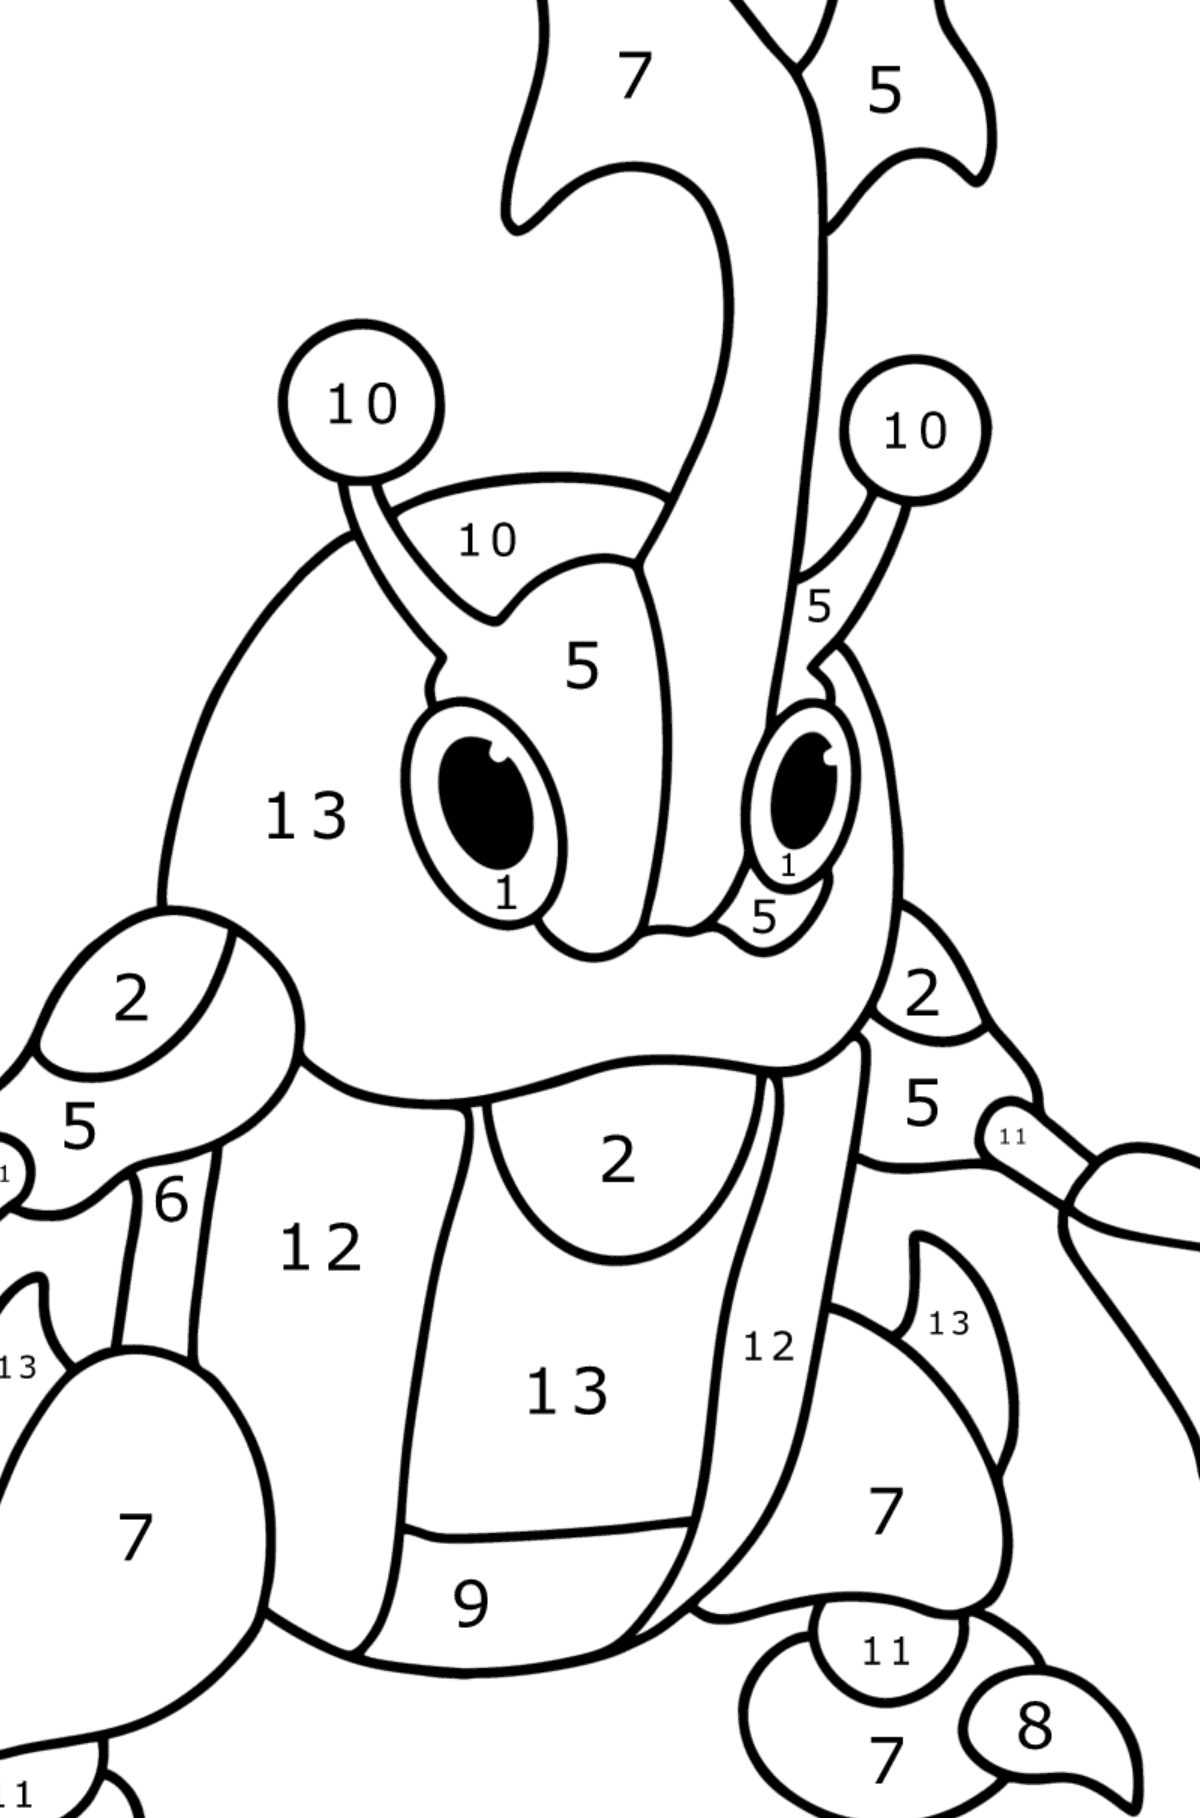 Colouring page Pokémon X and Y Heracross - Coloring by Numbers for Kids